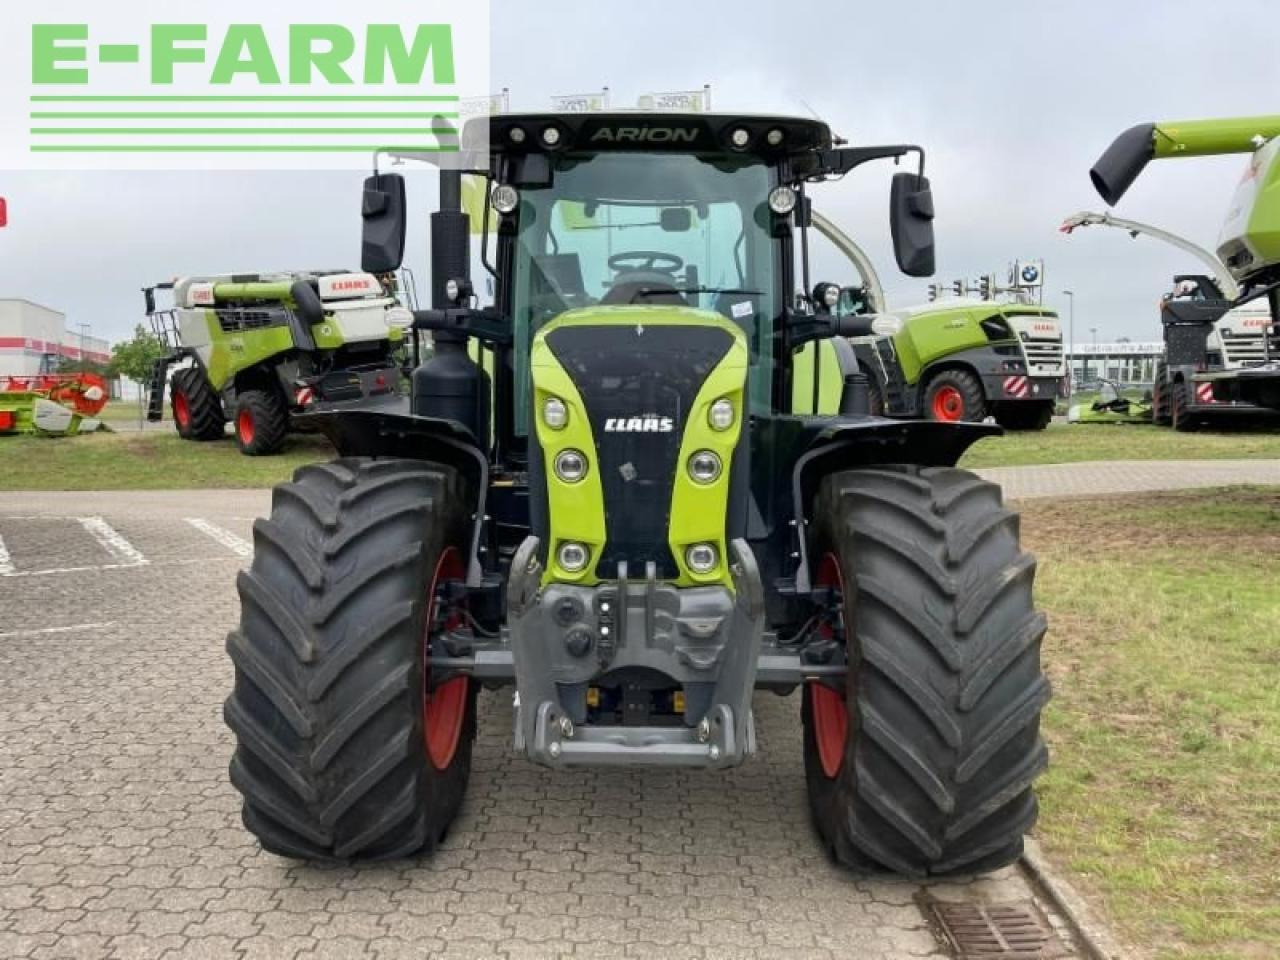 Tracteur agricole CLAAS arion 660 cmatic